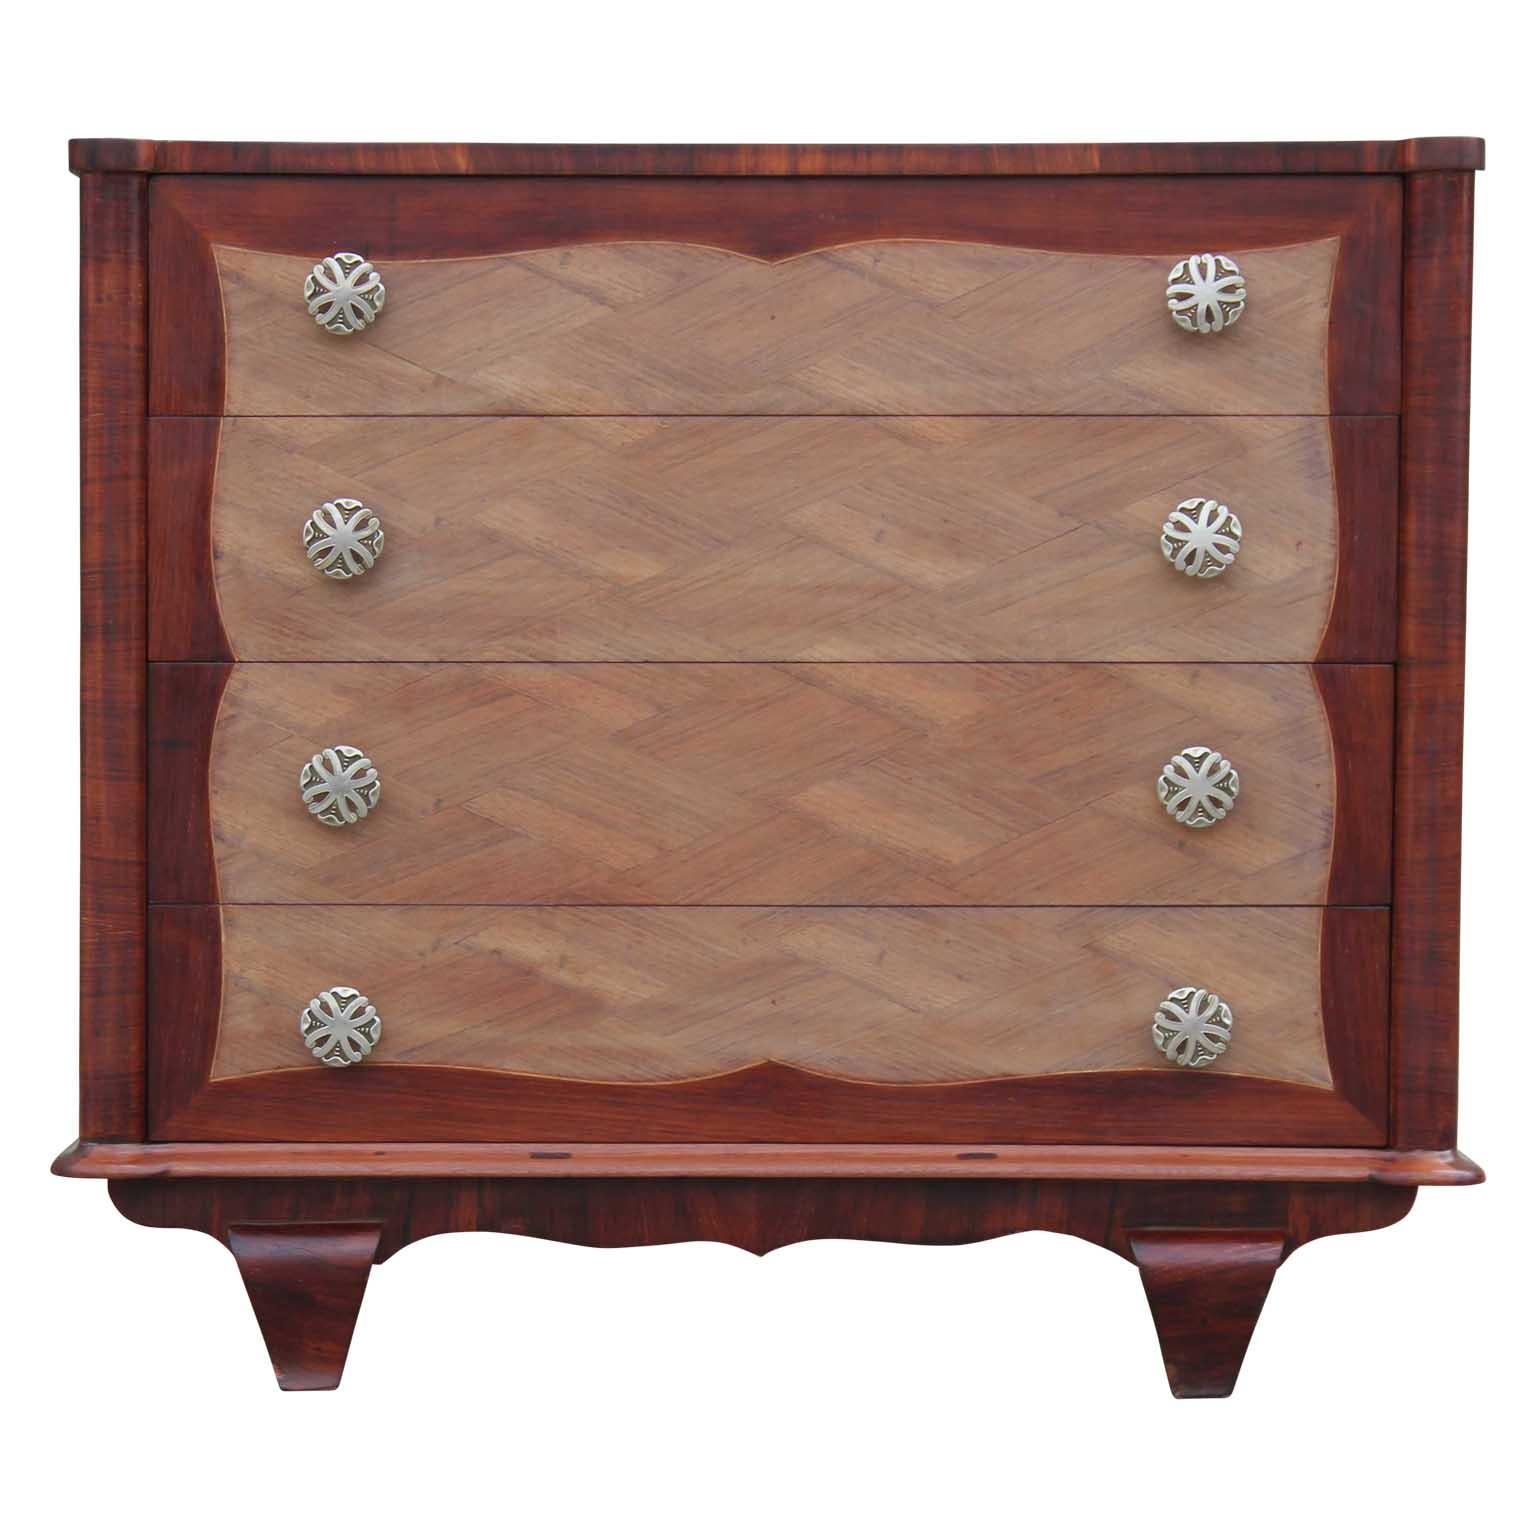 Modern Four-Drawer Italian Parquetry Restored Rosewood Chest